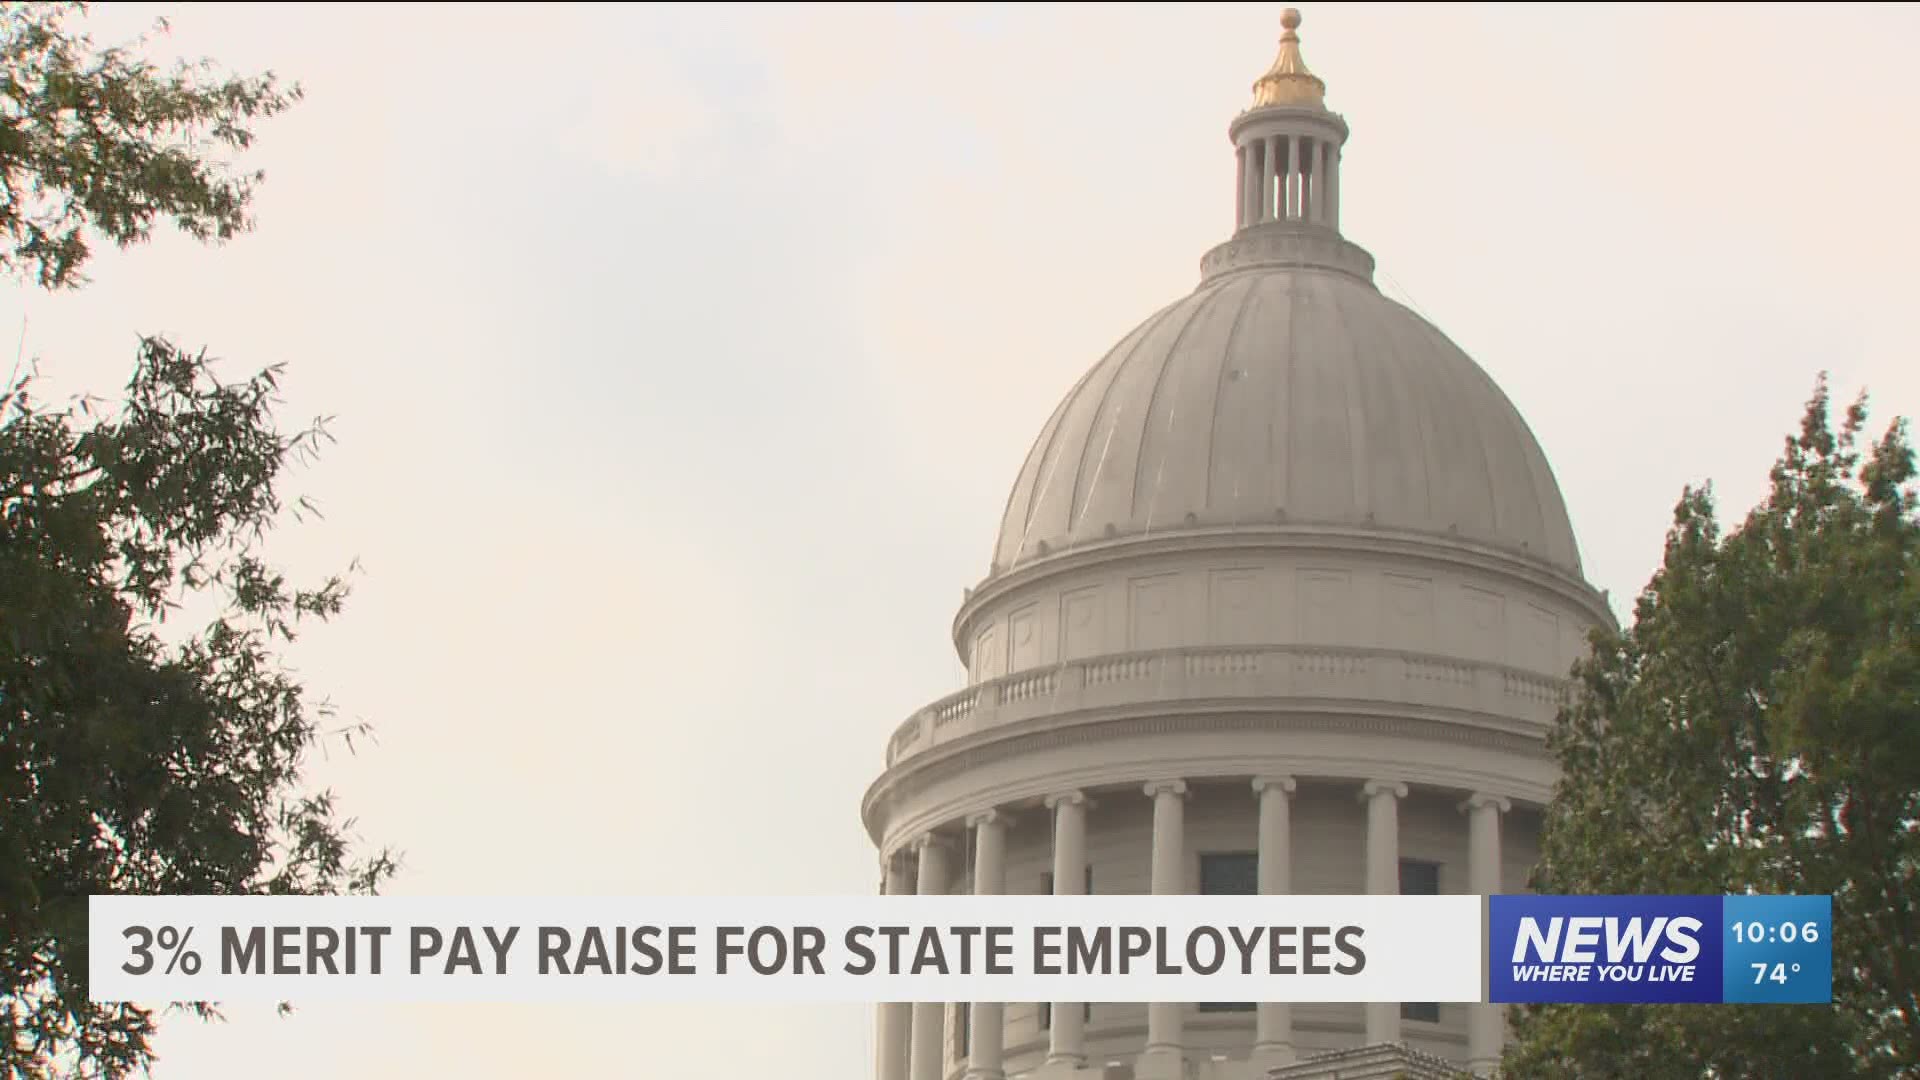 Arkansas governor approves 3 merit pay raises for workers